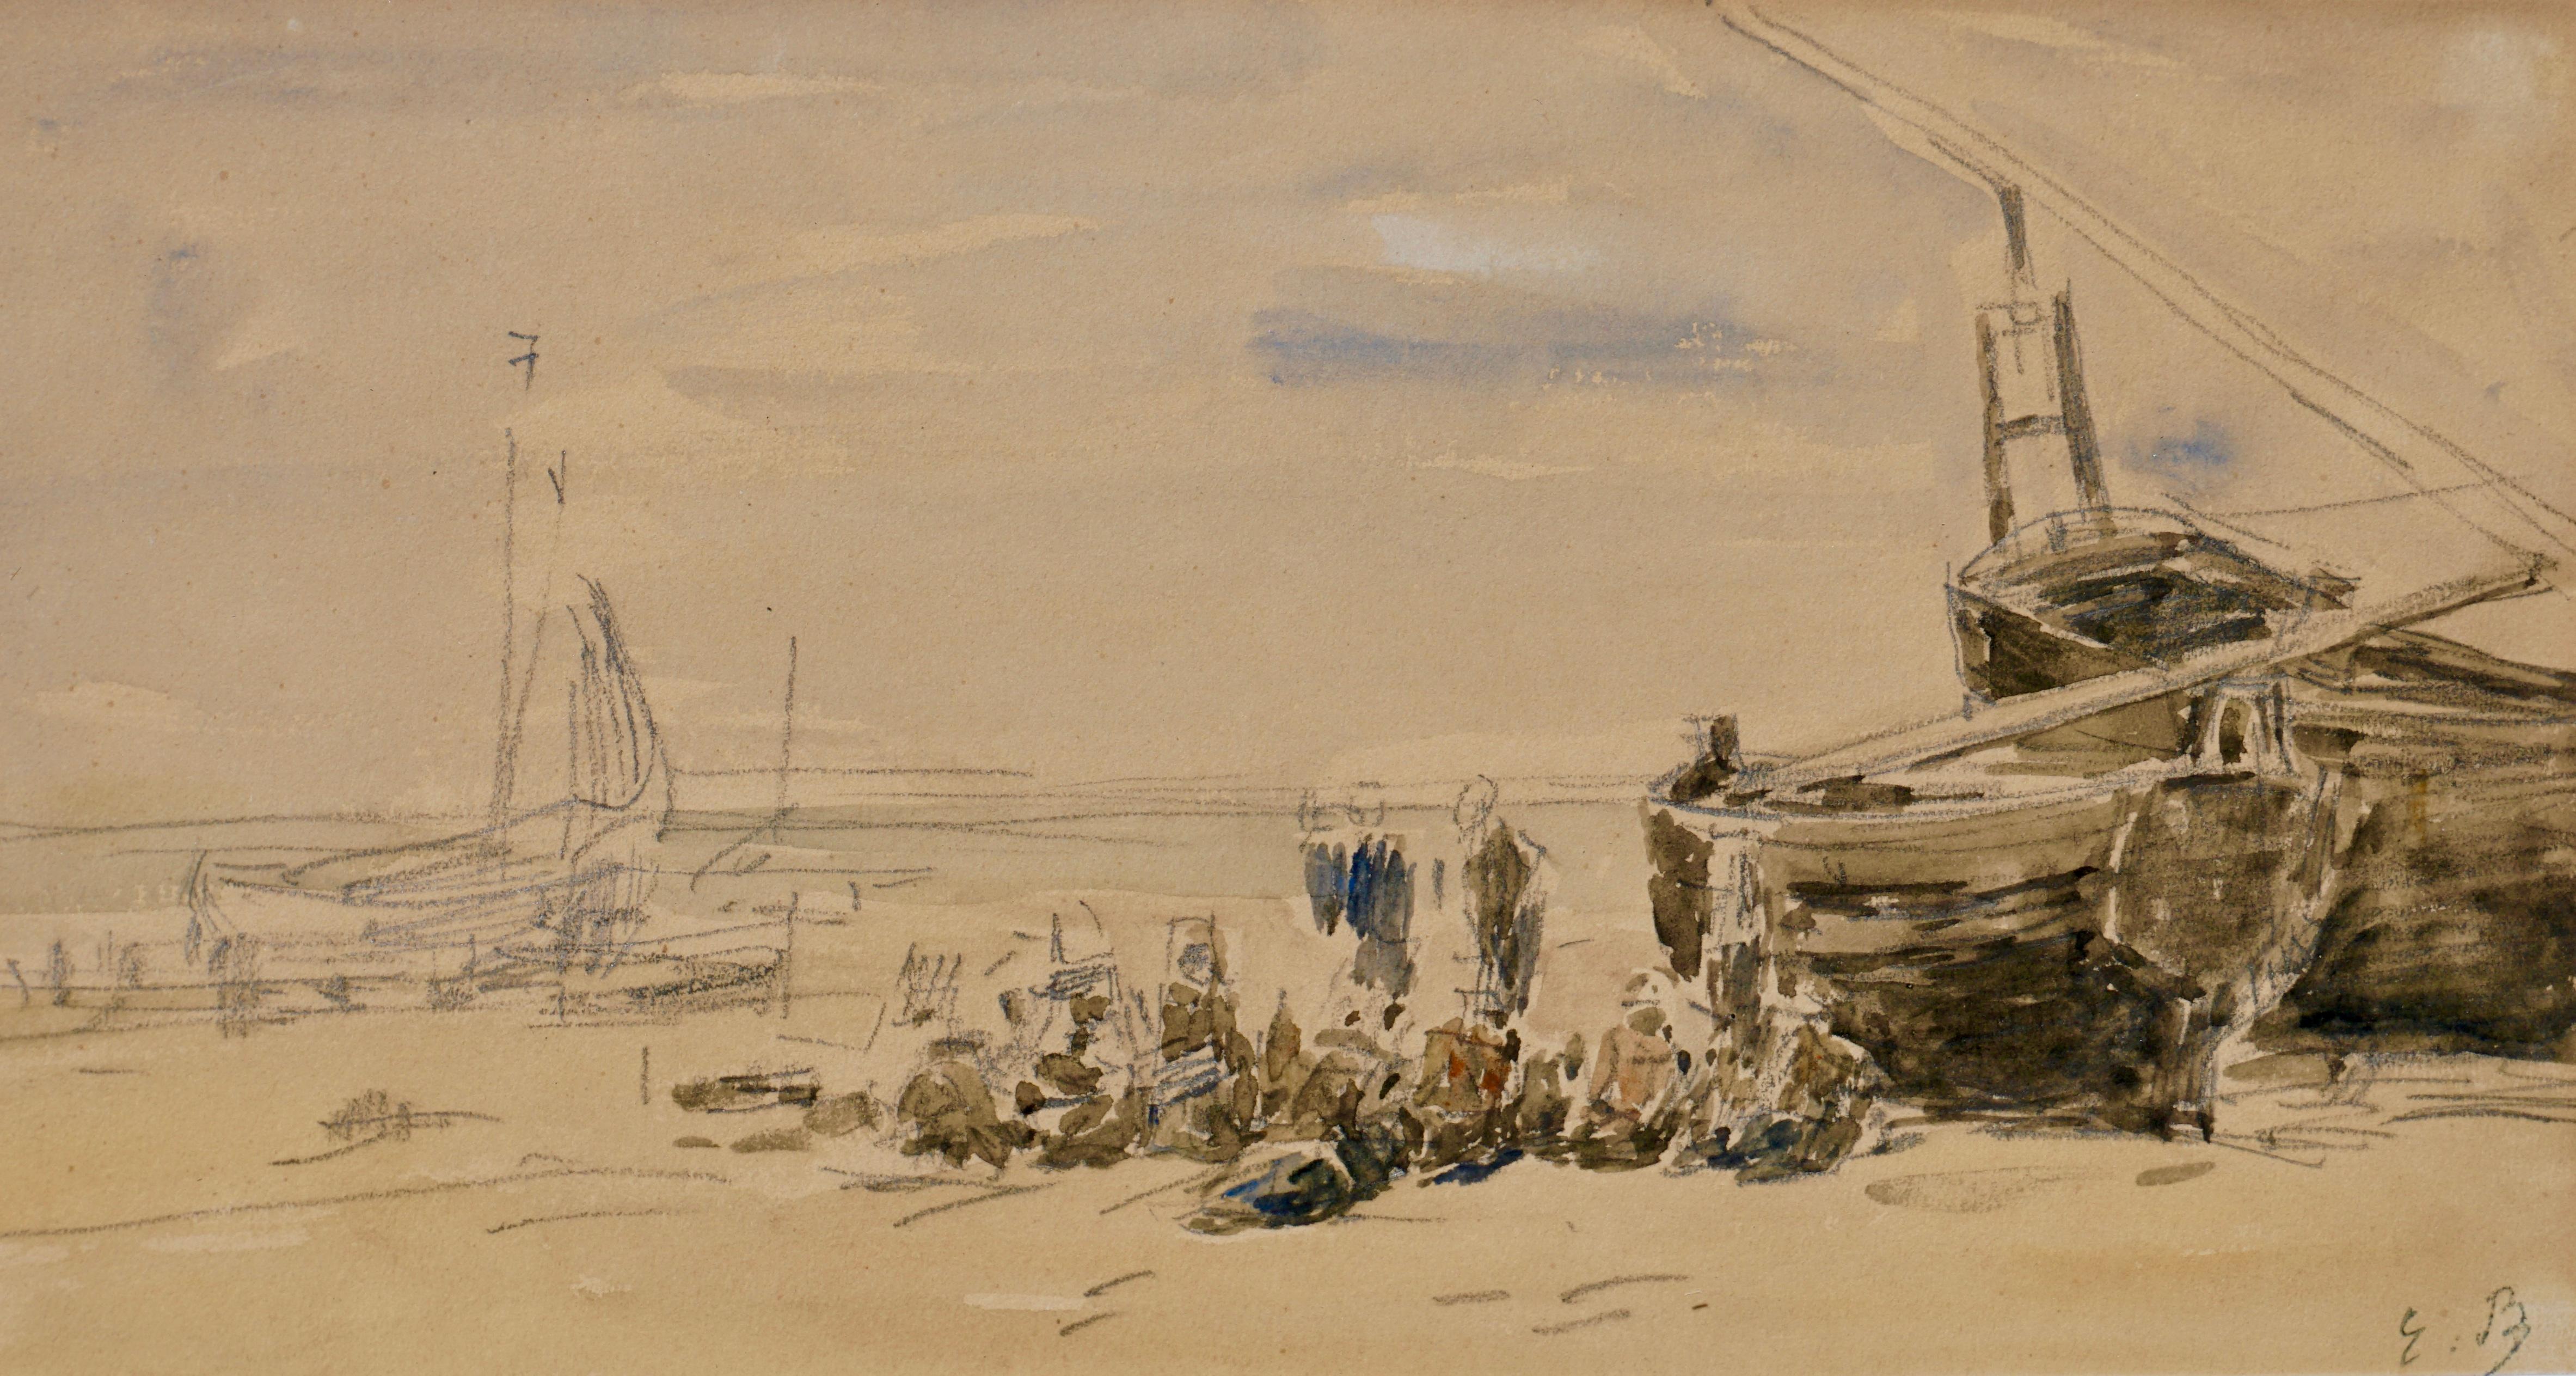 A wonderful beach or plage scene from Eugene Boudin during the low tide (maree basse) near Berck in the Northern tip ofNormandy. Boudin did most of his beach scenes in Dauville, Trouville and Honfleur with rarer ones of Fisherman and beached boats